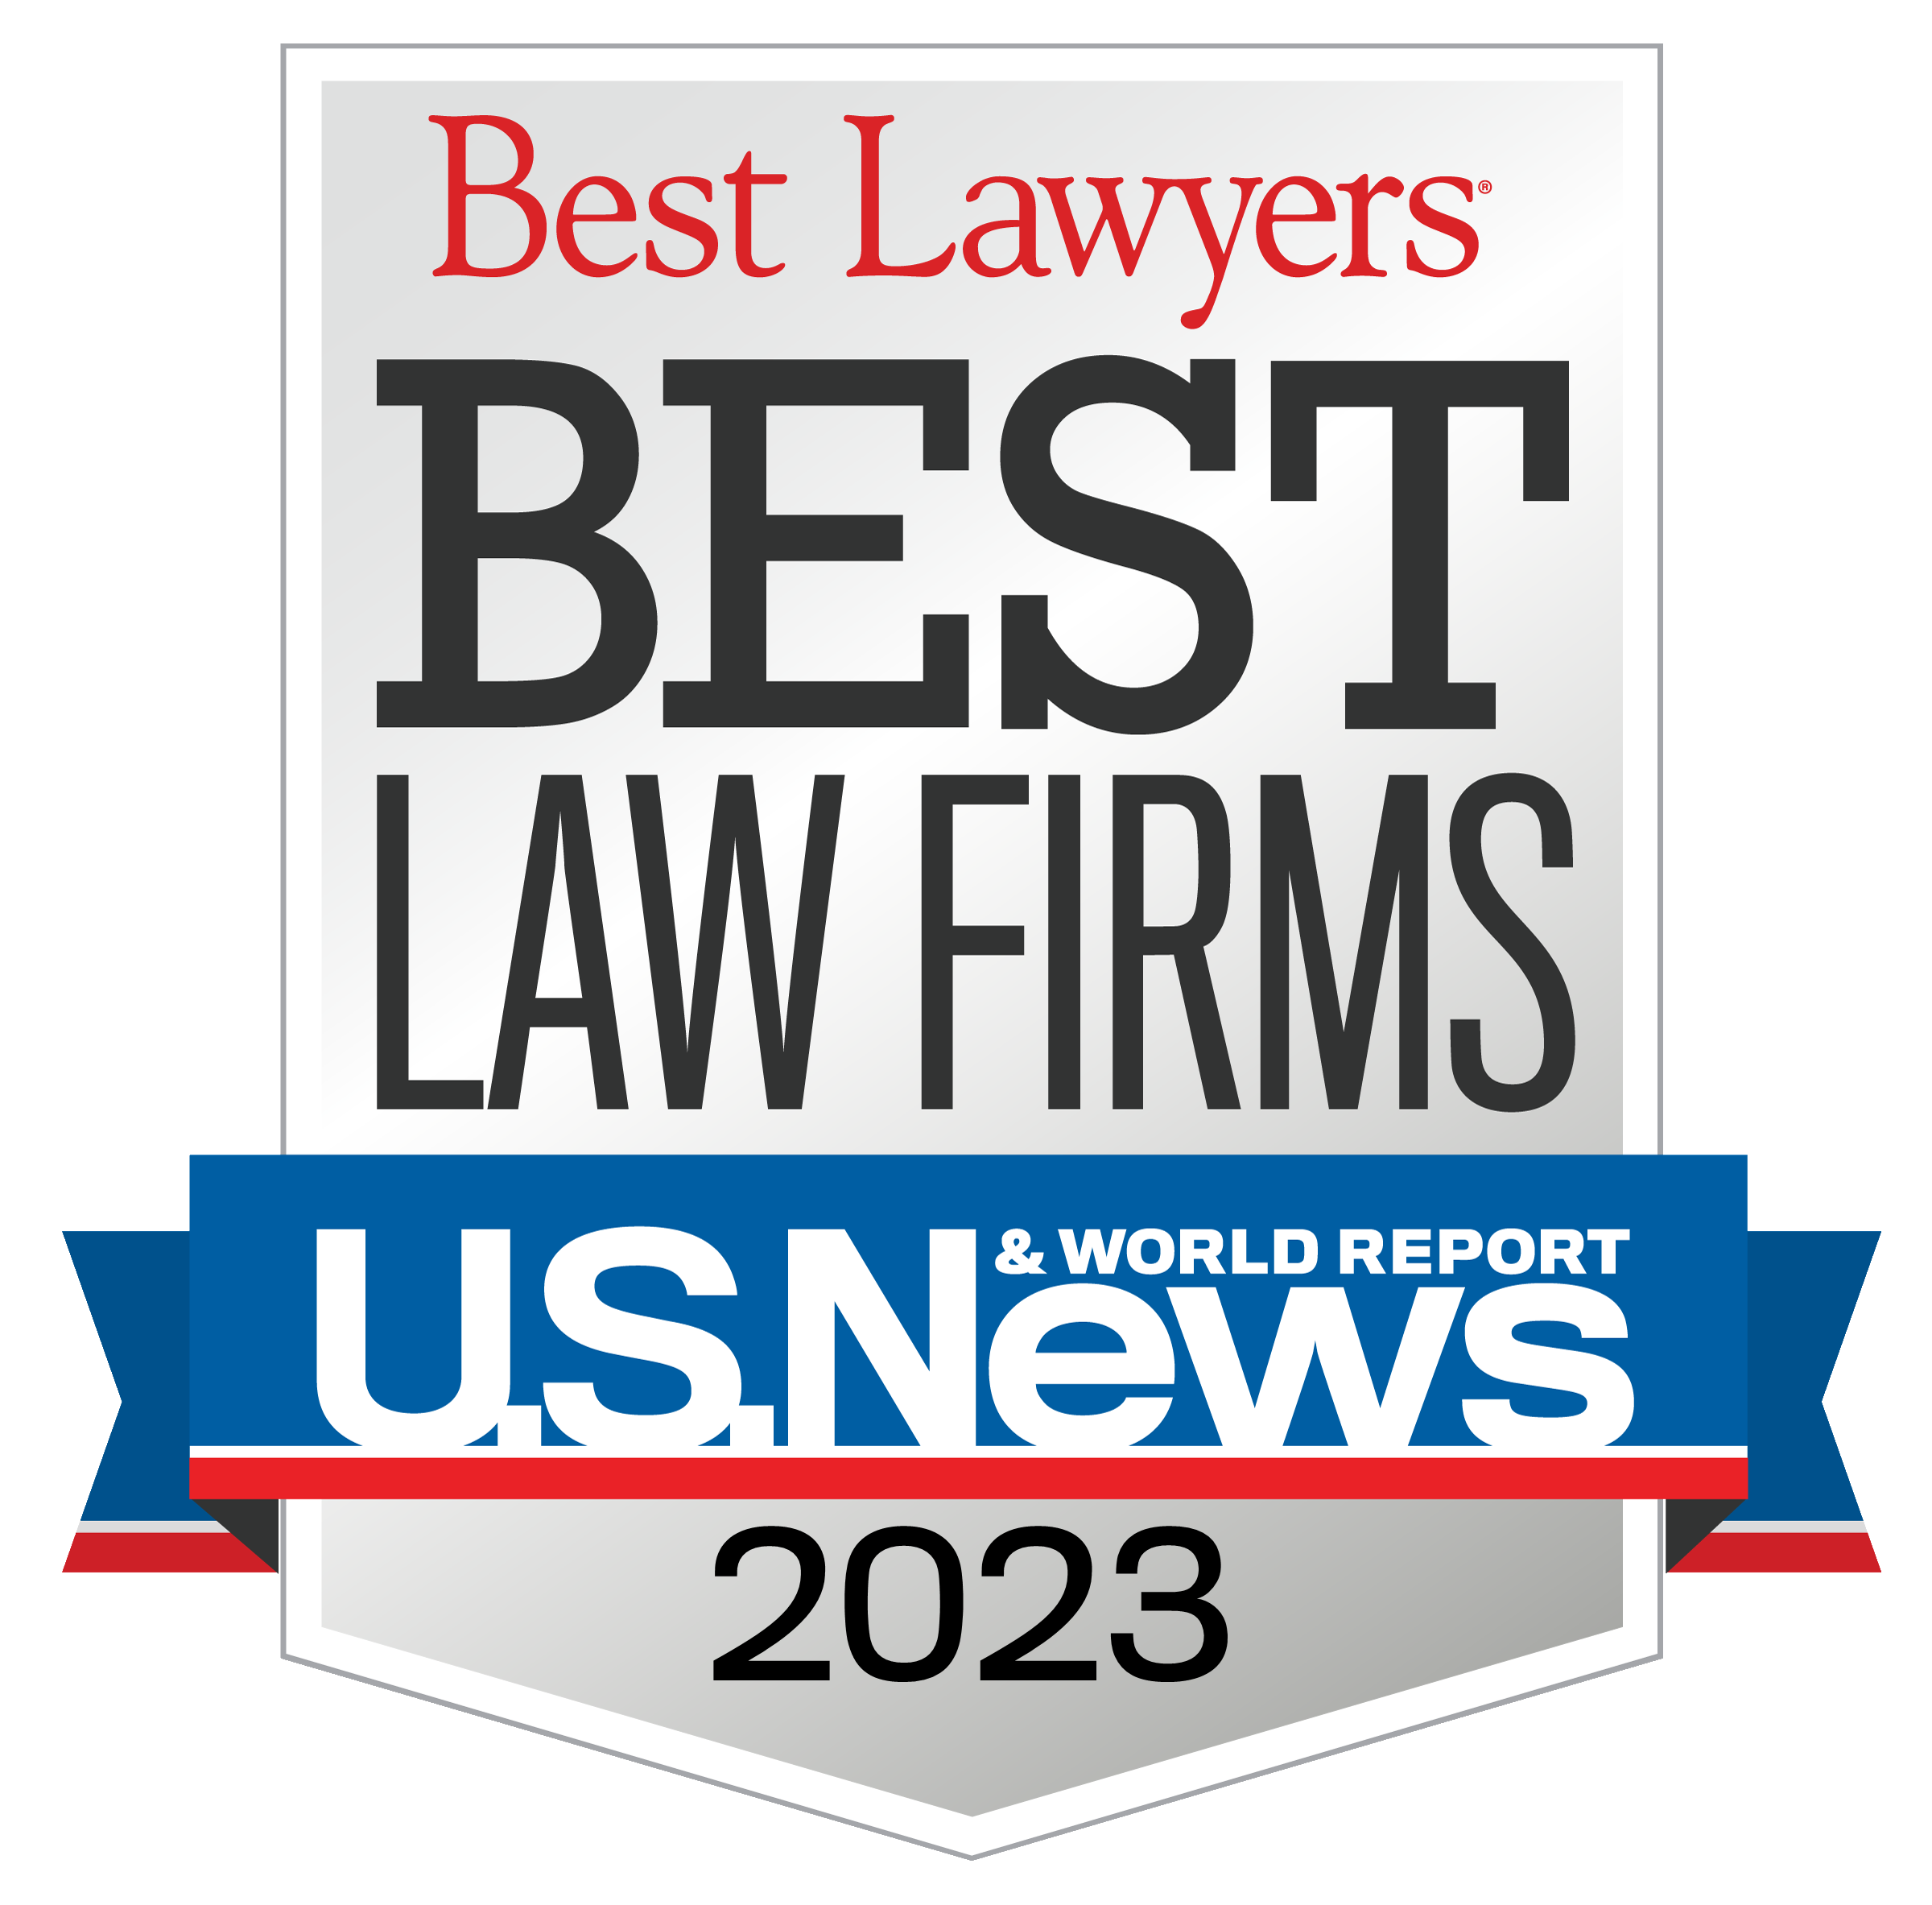 Best Law Firms awarded by U.S. News & World Report Best Lawyers in 2023